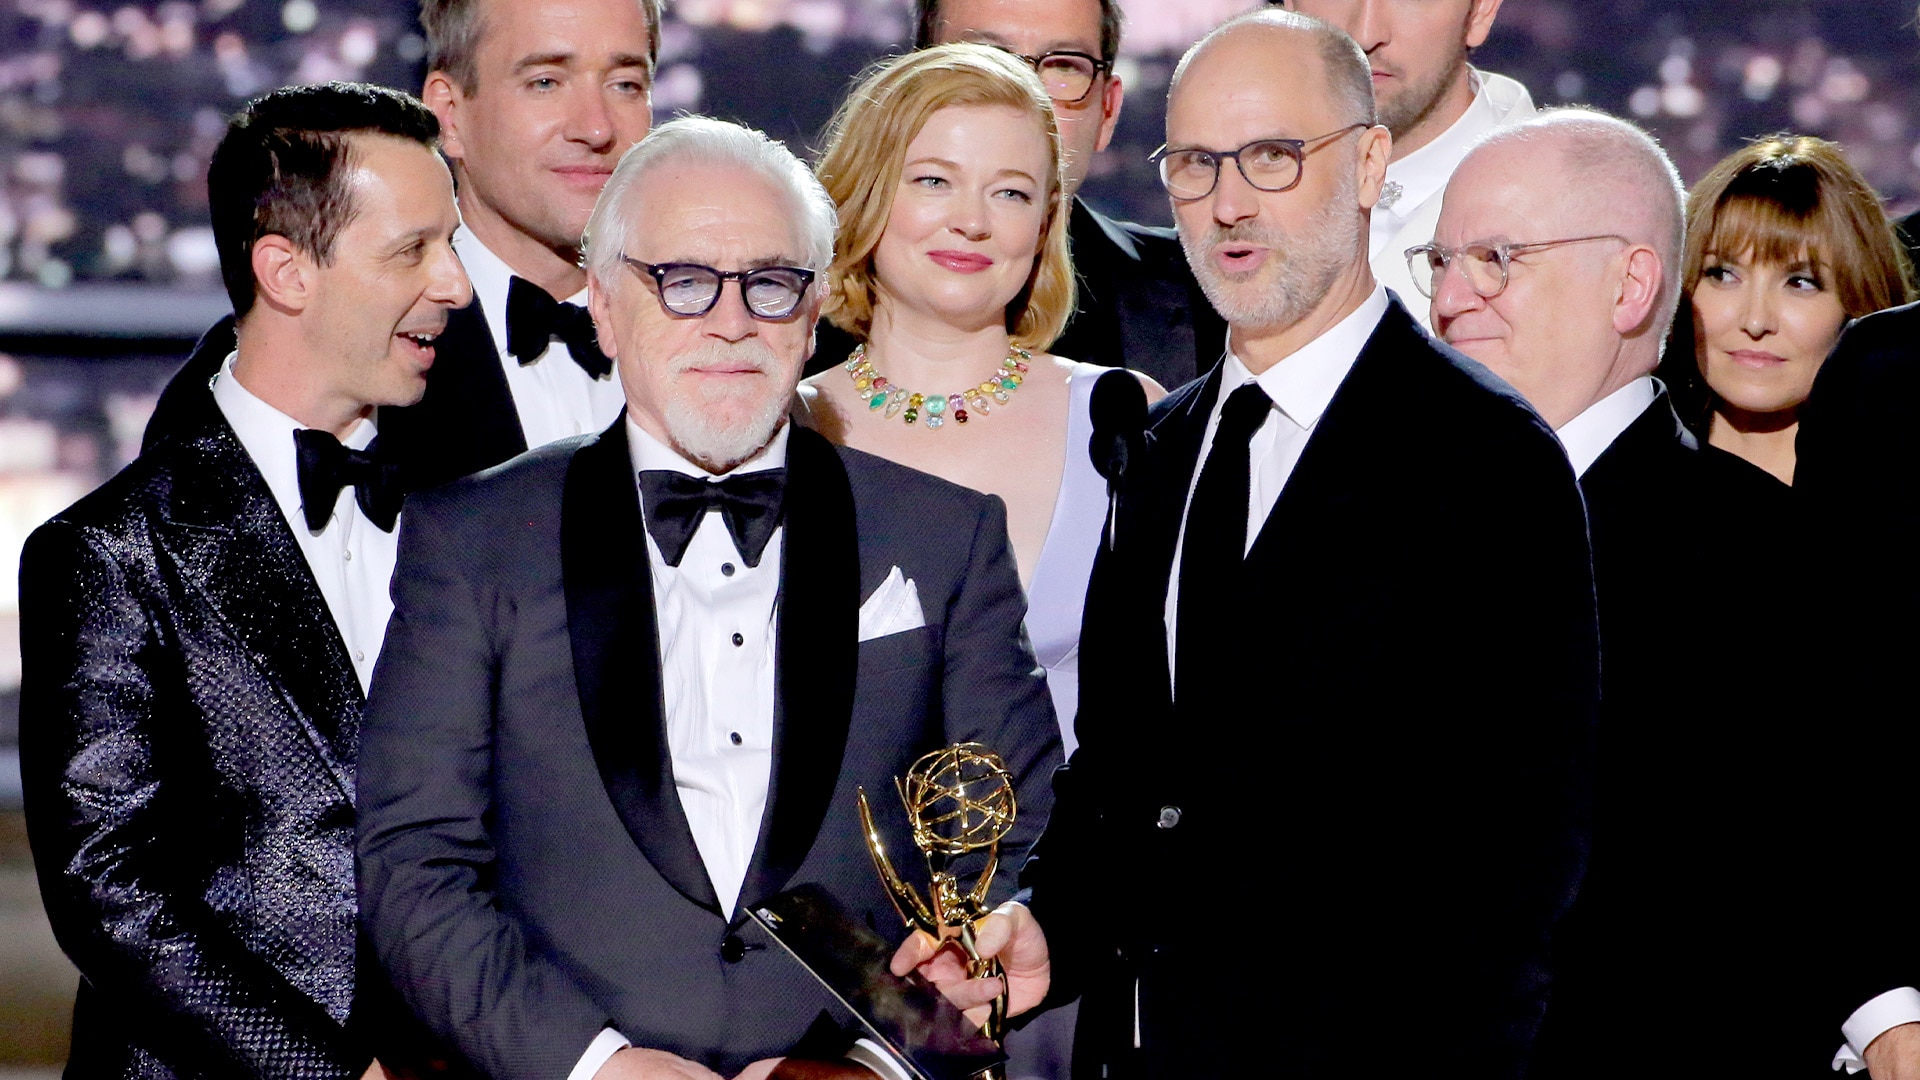 Watch The Primetime Emmy Awards Highlight Succession Wins for